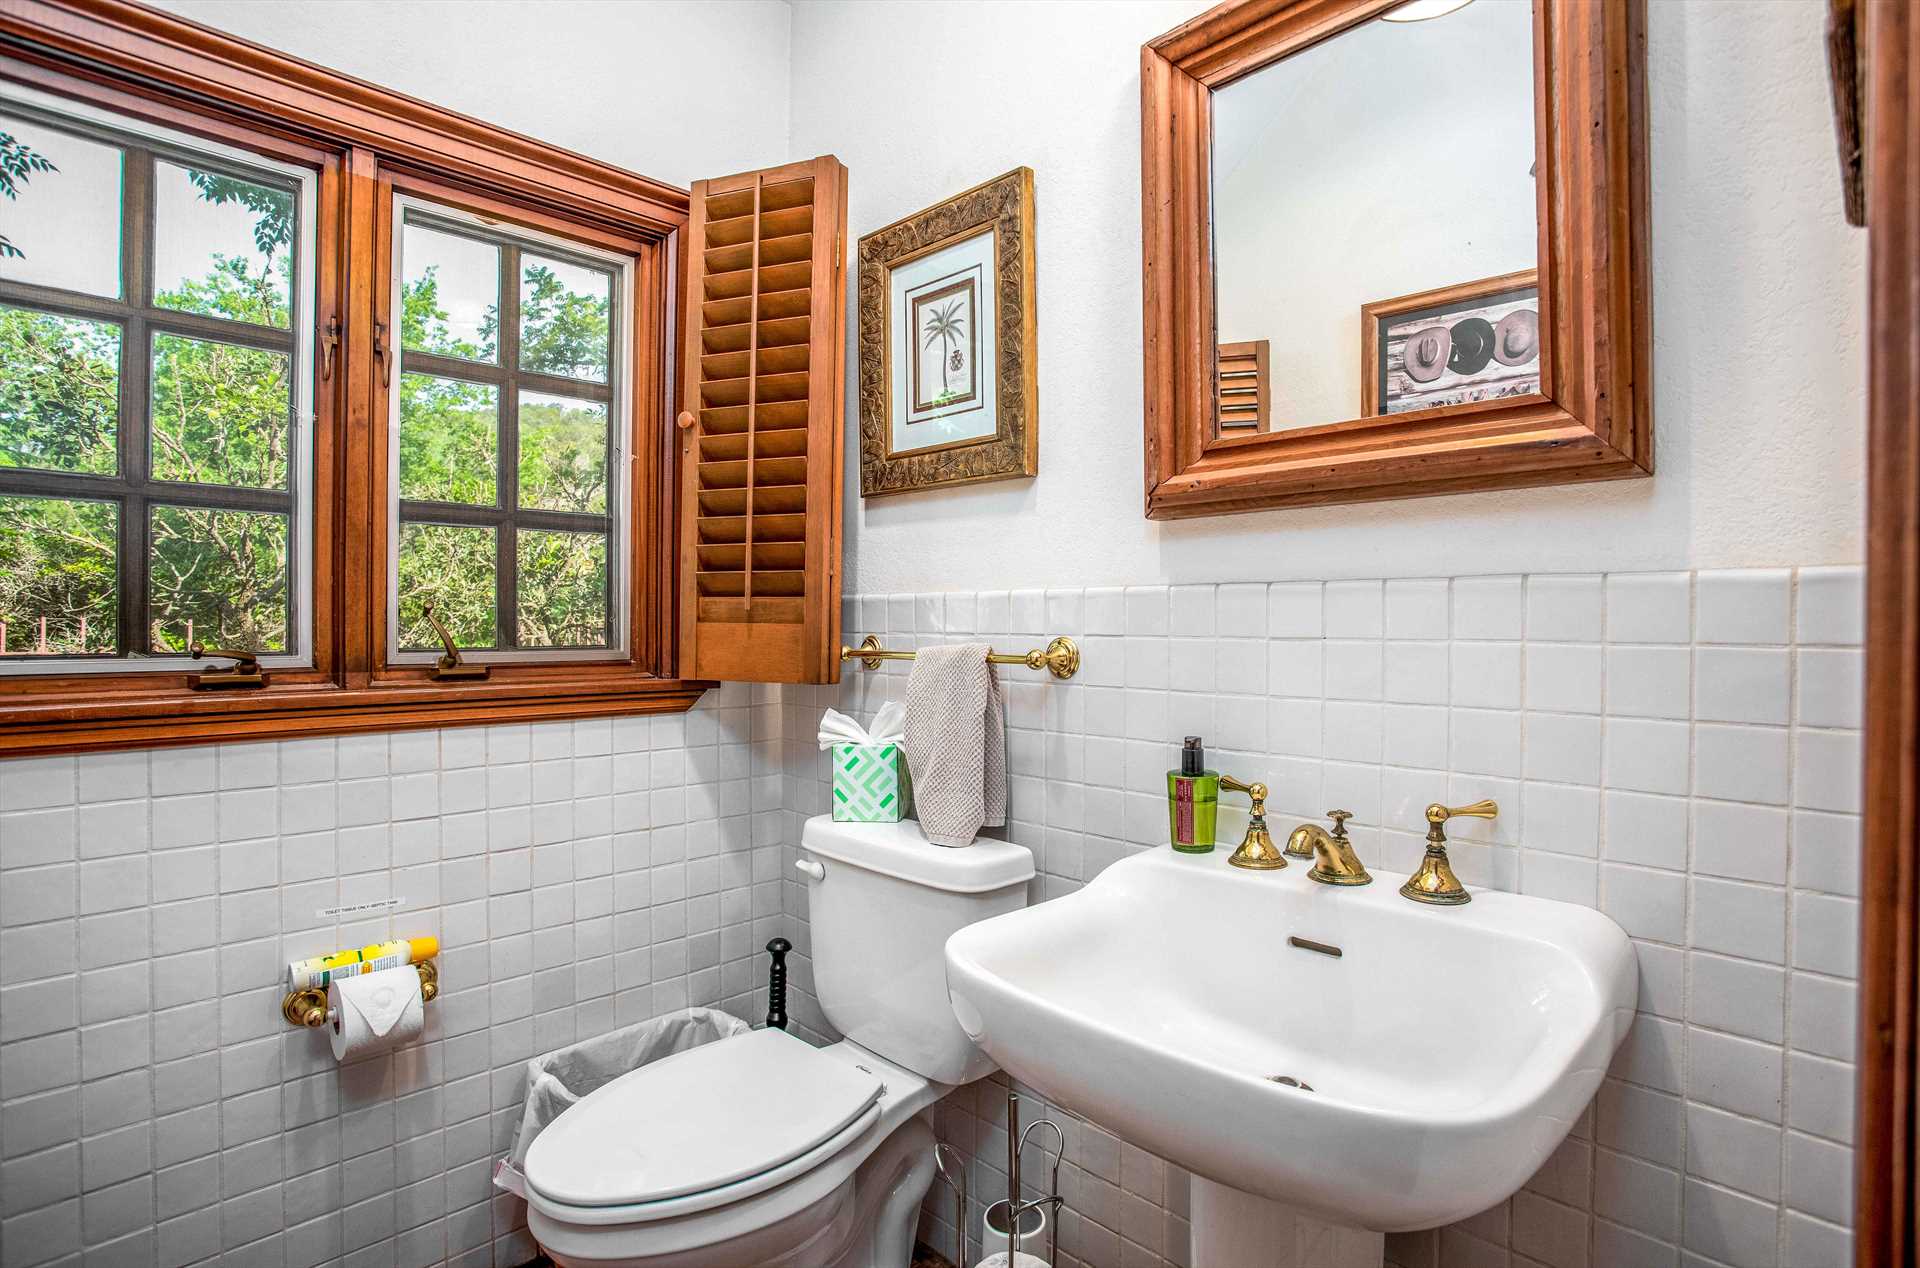                                                 Extra cleanup convenience can be found in the Homestead's sparkling-clean half-bath!